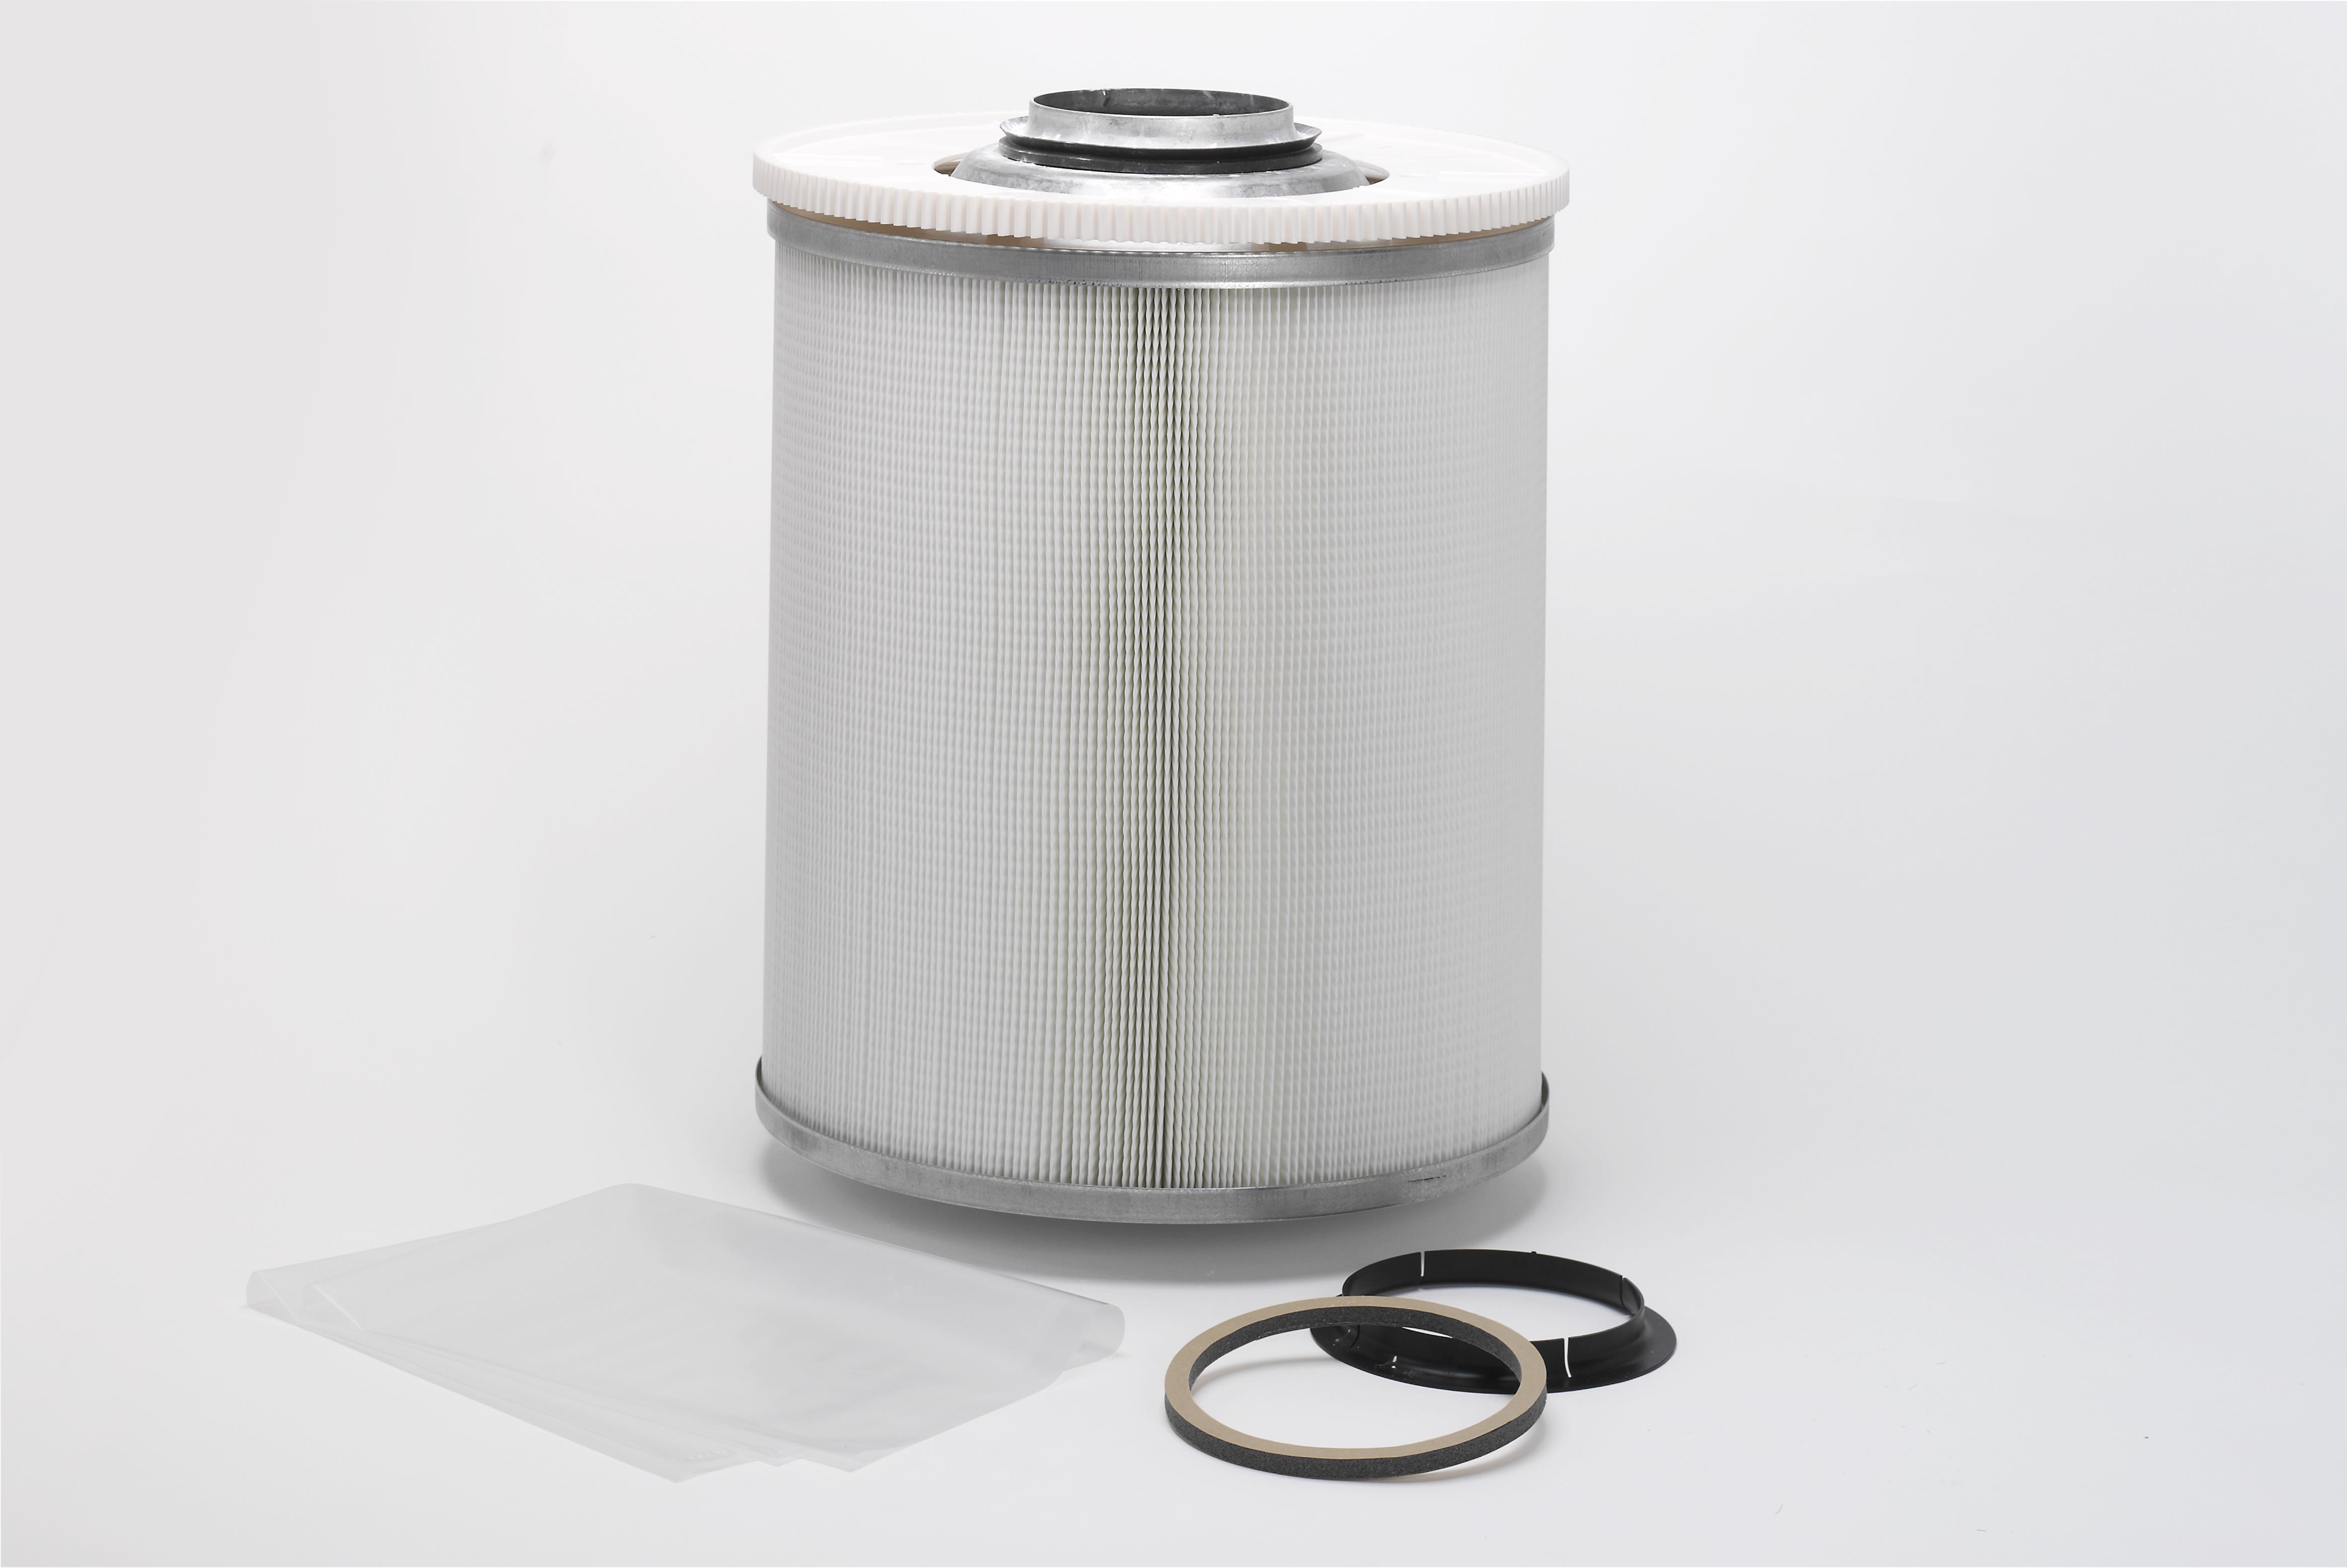 High efficiency main filter for FilterBox, HE15